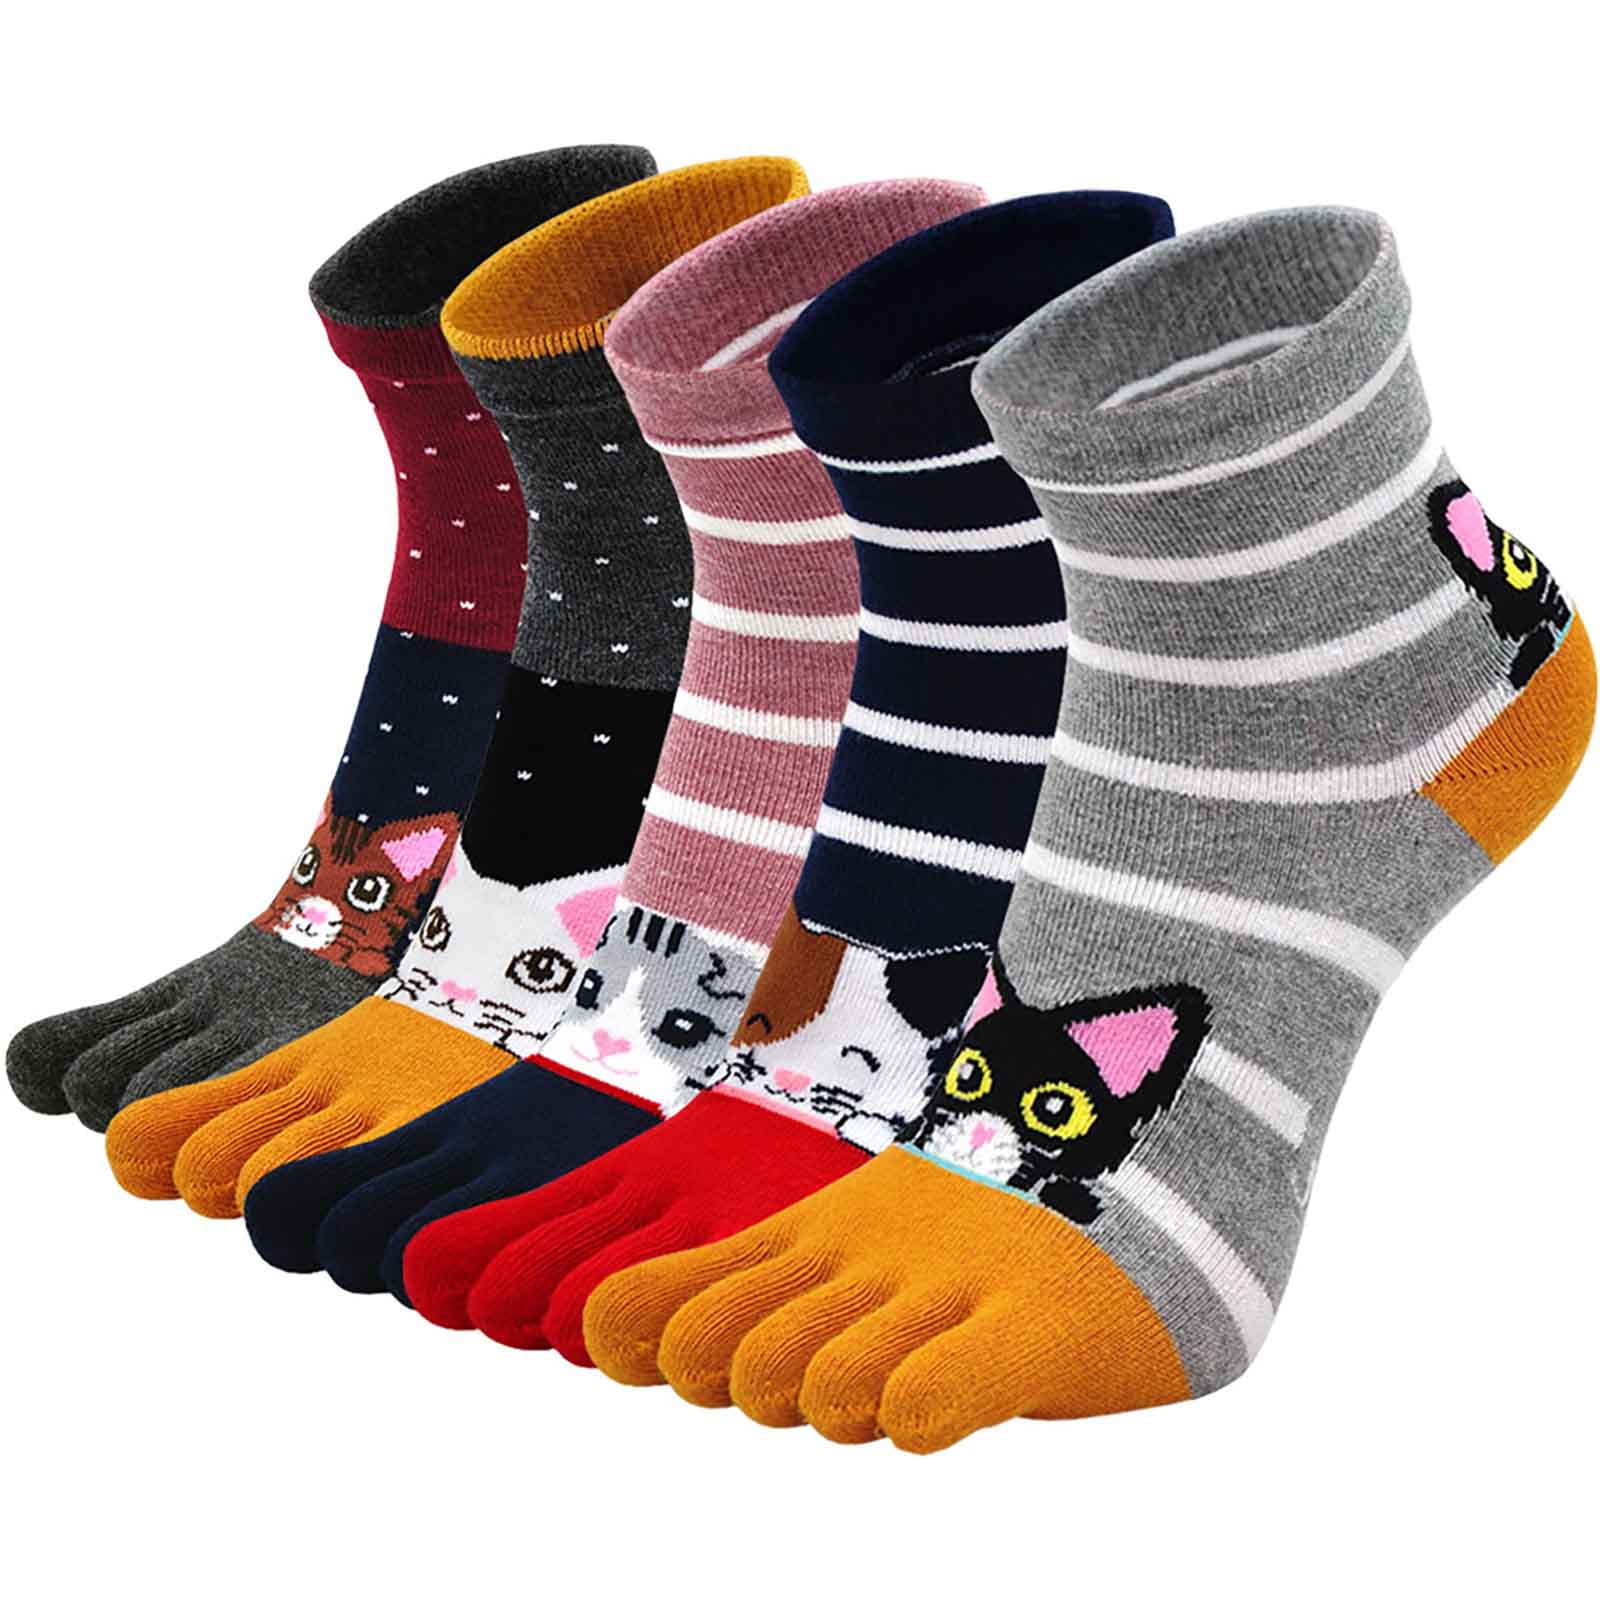 5 Pairs Lady Girl Five Fingers Toe Ankle Socks Polka Dot Sports Comfortable  chic